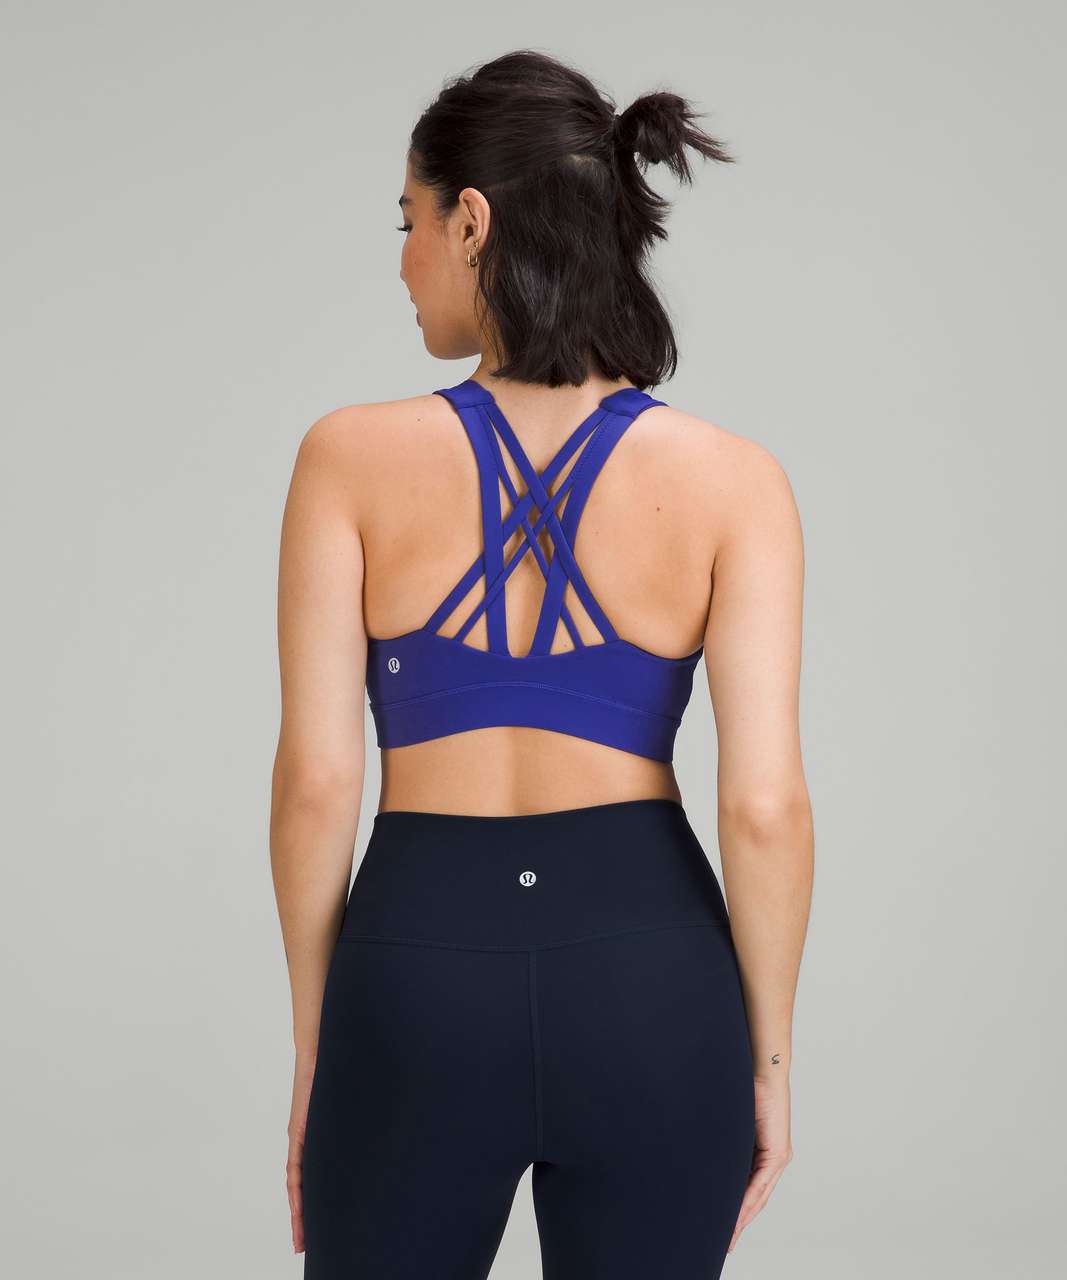 Lululemon Free to Be Elevated Bra *Light Support, DD/DDD(E) Cup - Psychic